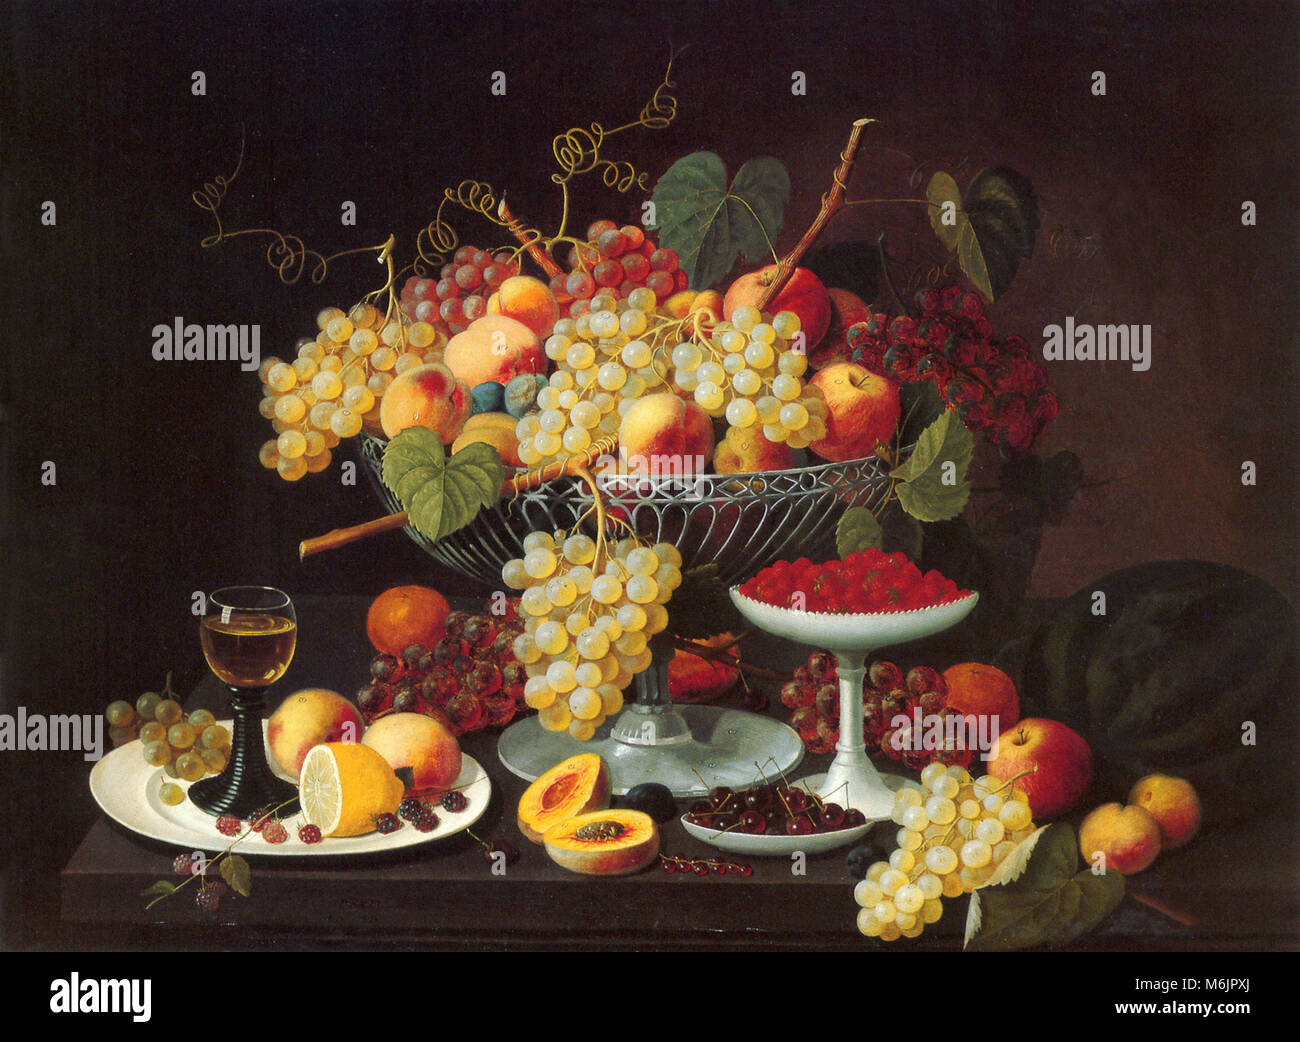 Still Life with Fruit, Roesen, Severin, 1850. Stock Photo